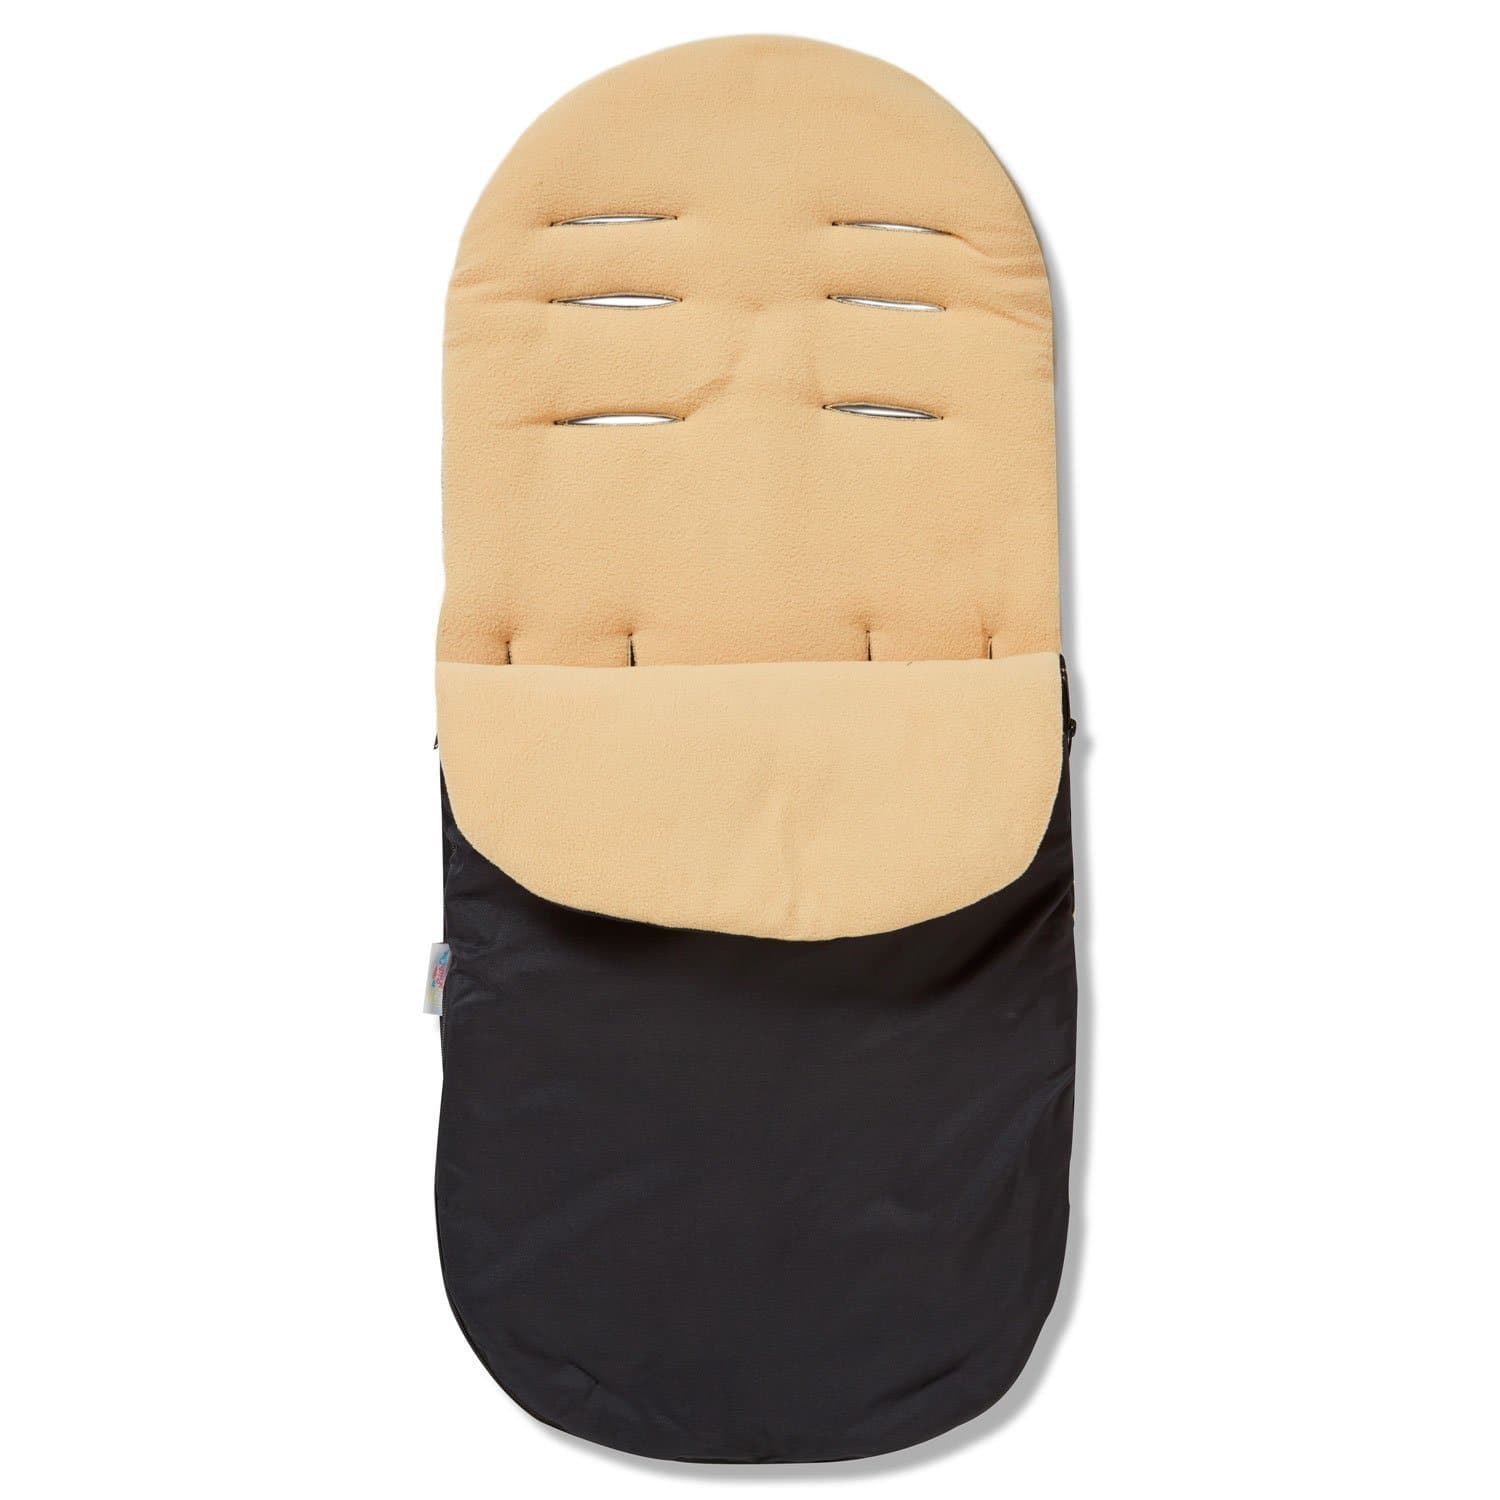 Footmuff / Cosy Toes Compatible with ABC Design - Sand / Fits All Models | For Your Little One